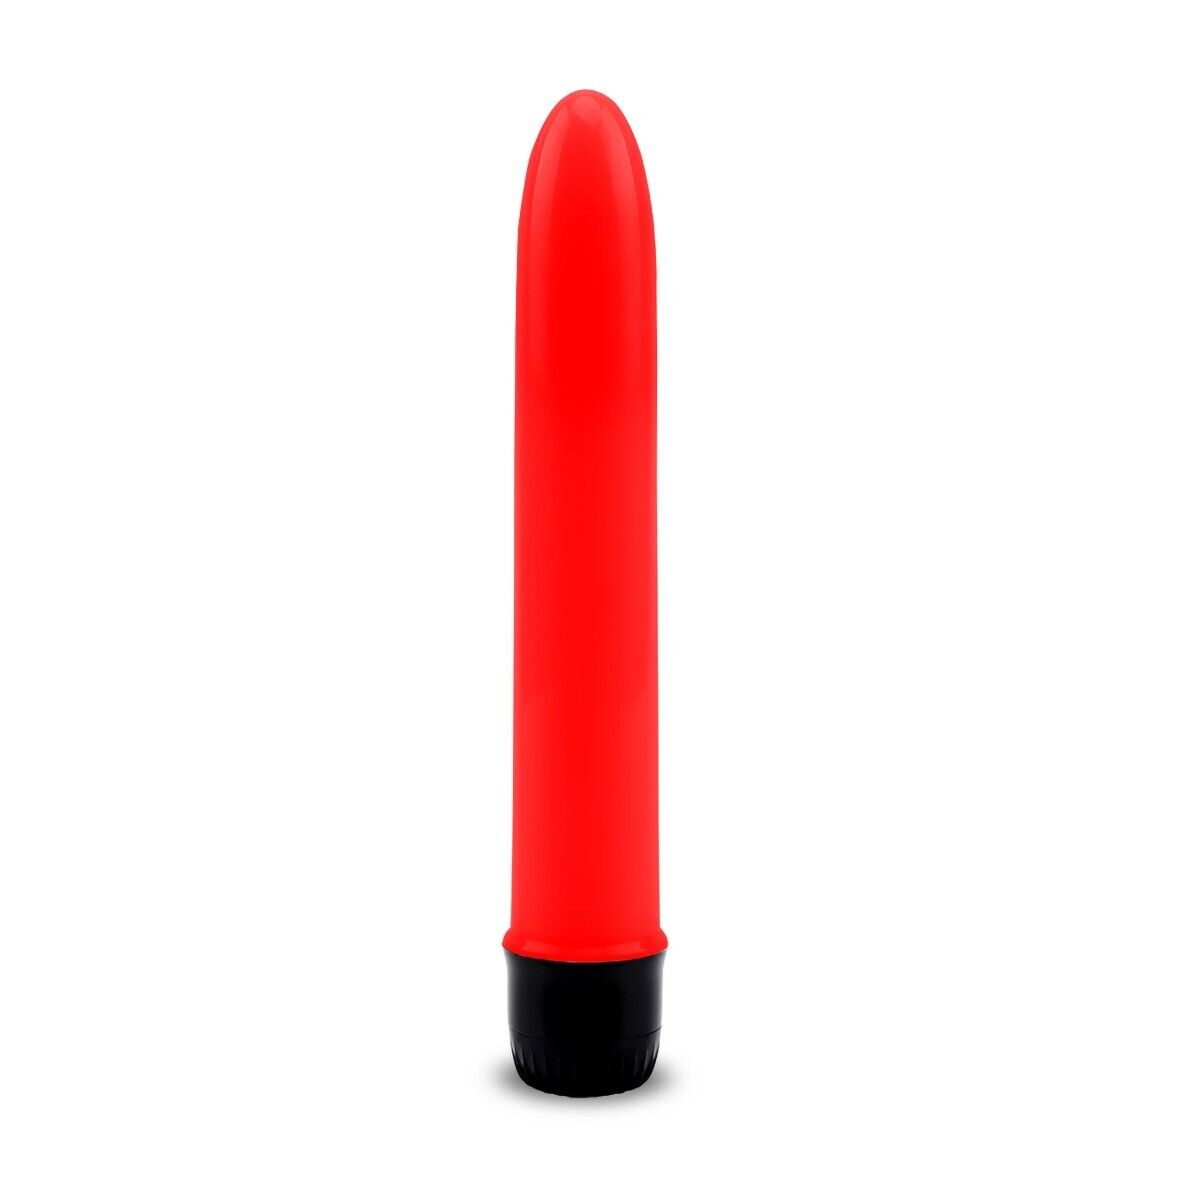 Red Lover Sex Toy Kit Anal Beads Penis Cock Ring Realistic Vibrator Dildo